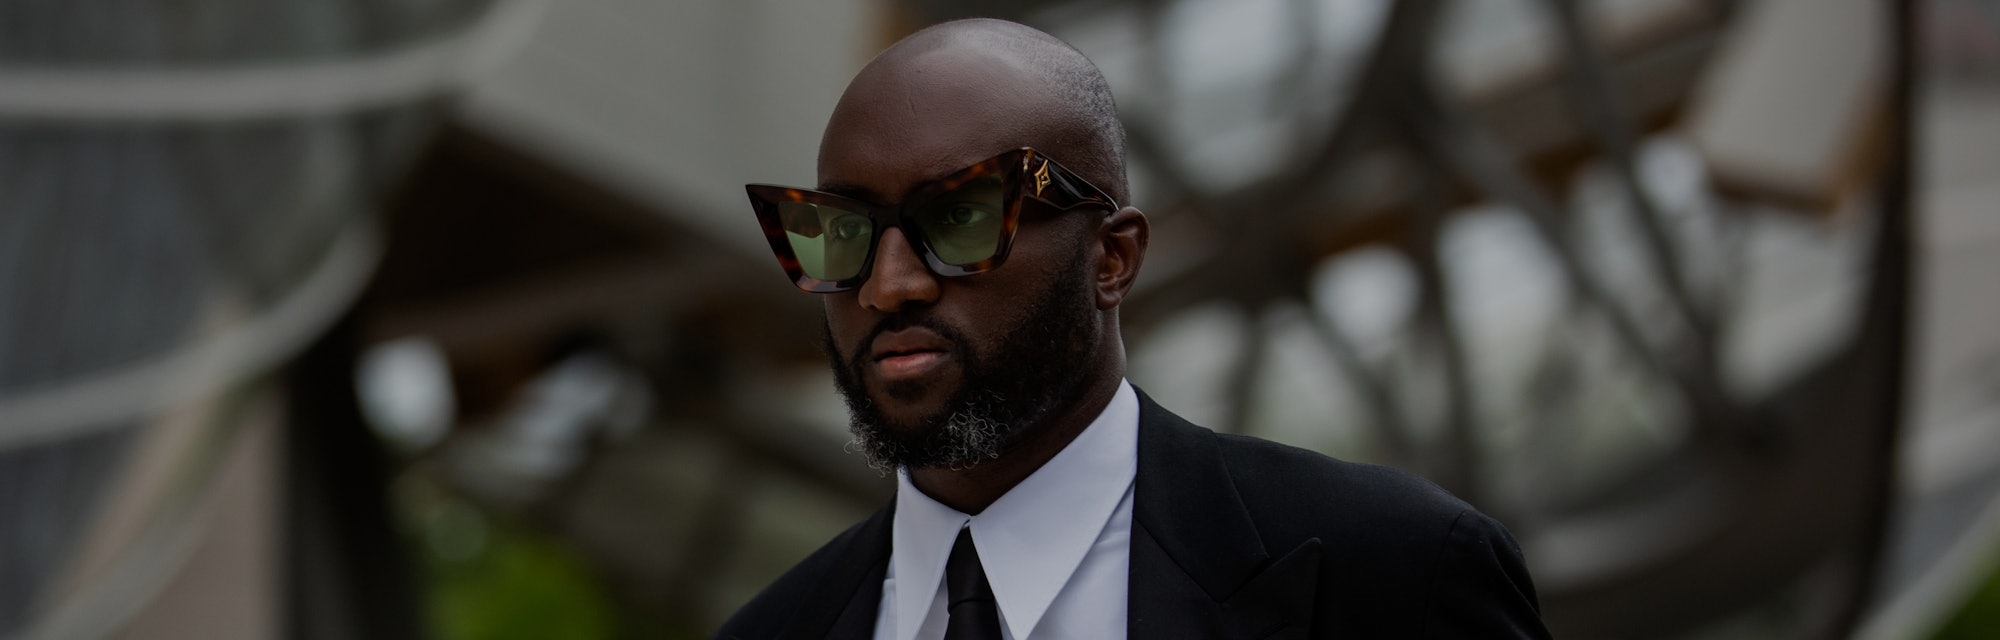 PARIS, FRANCE - JULY 05: Virgil Abloh is seen wearing tie and suit, white button shirt, sunglasses o...